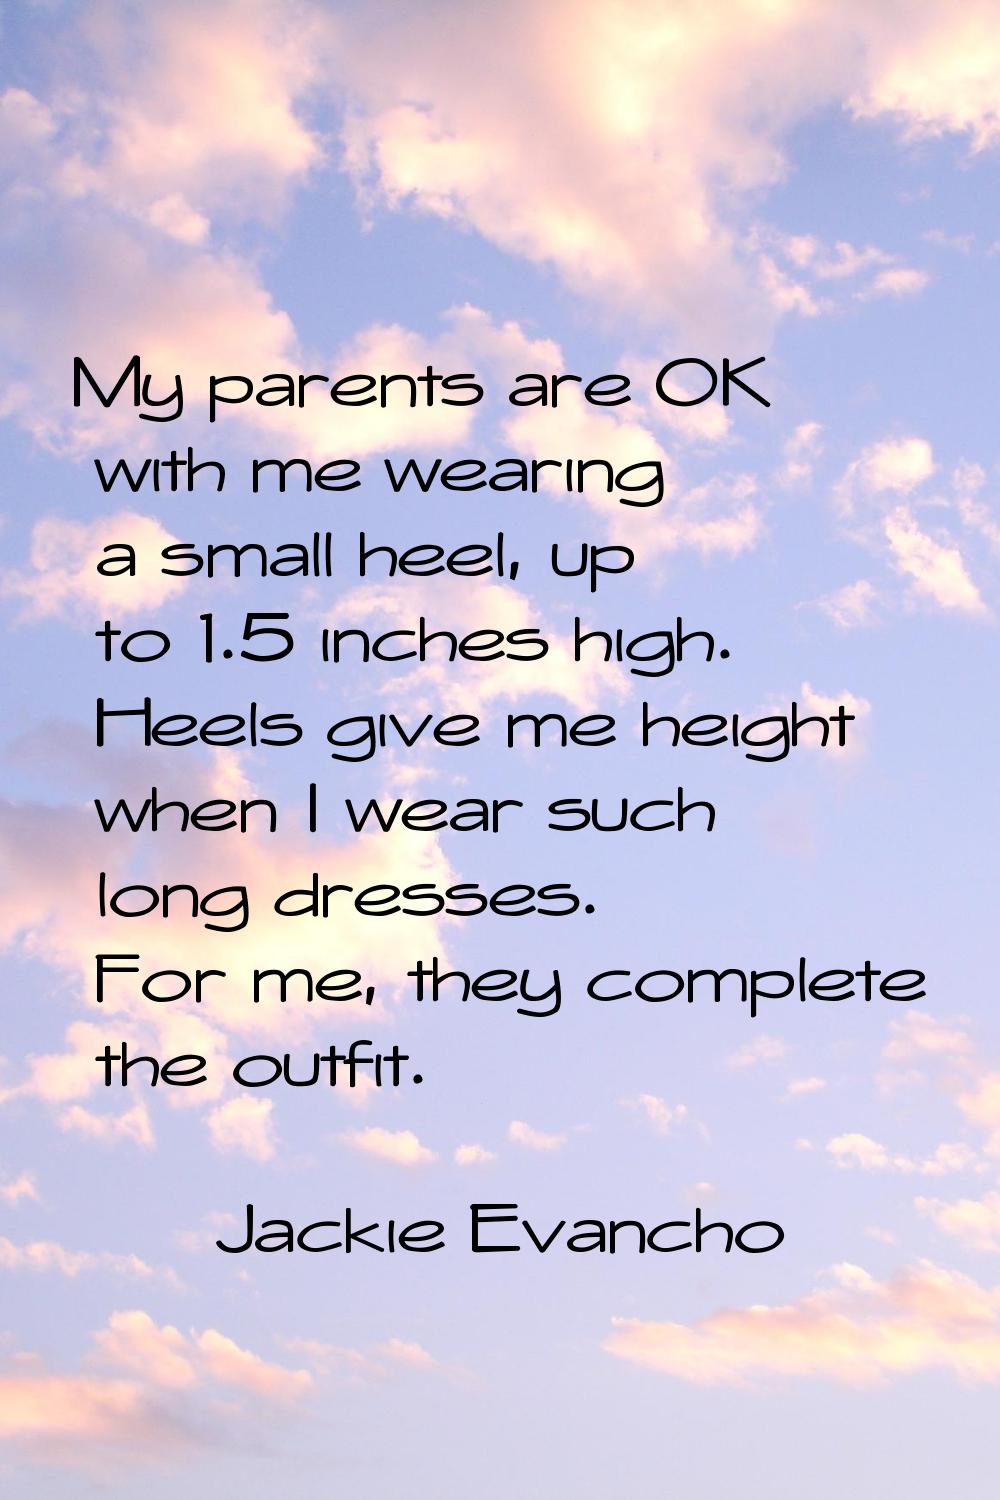 My parents are OK with me wearing a small heel, up to 1.5 inches high. Heels give me height when I 